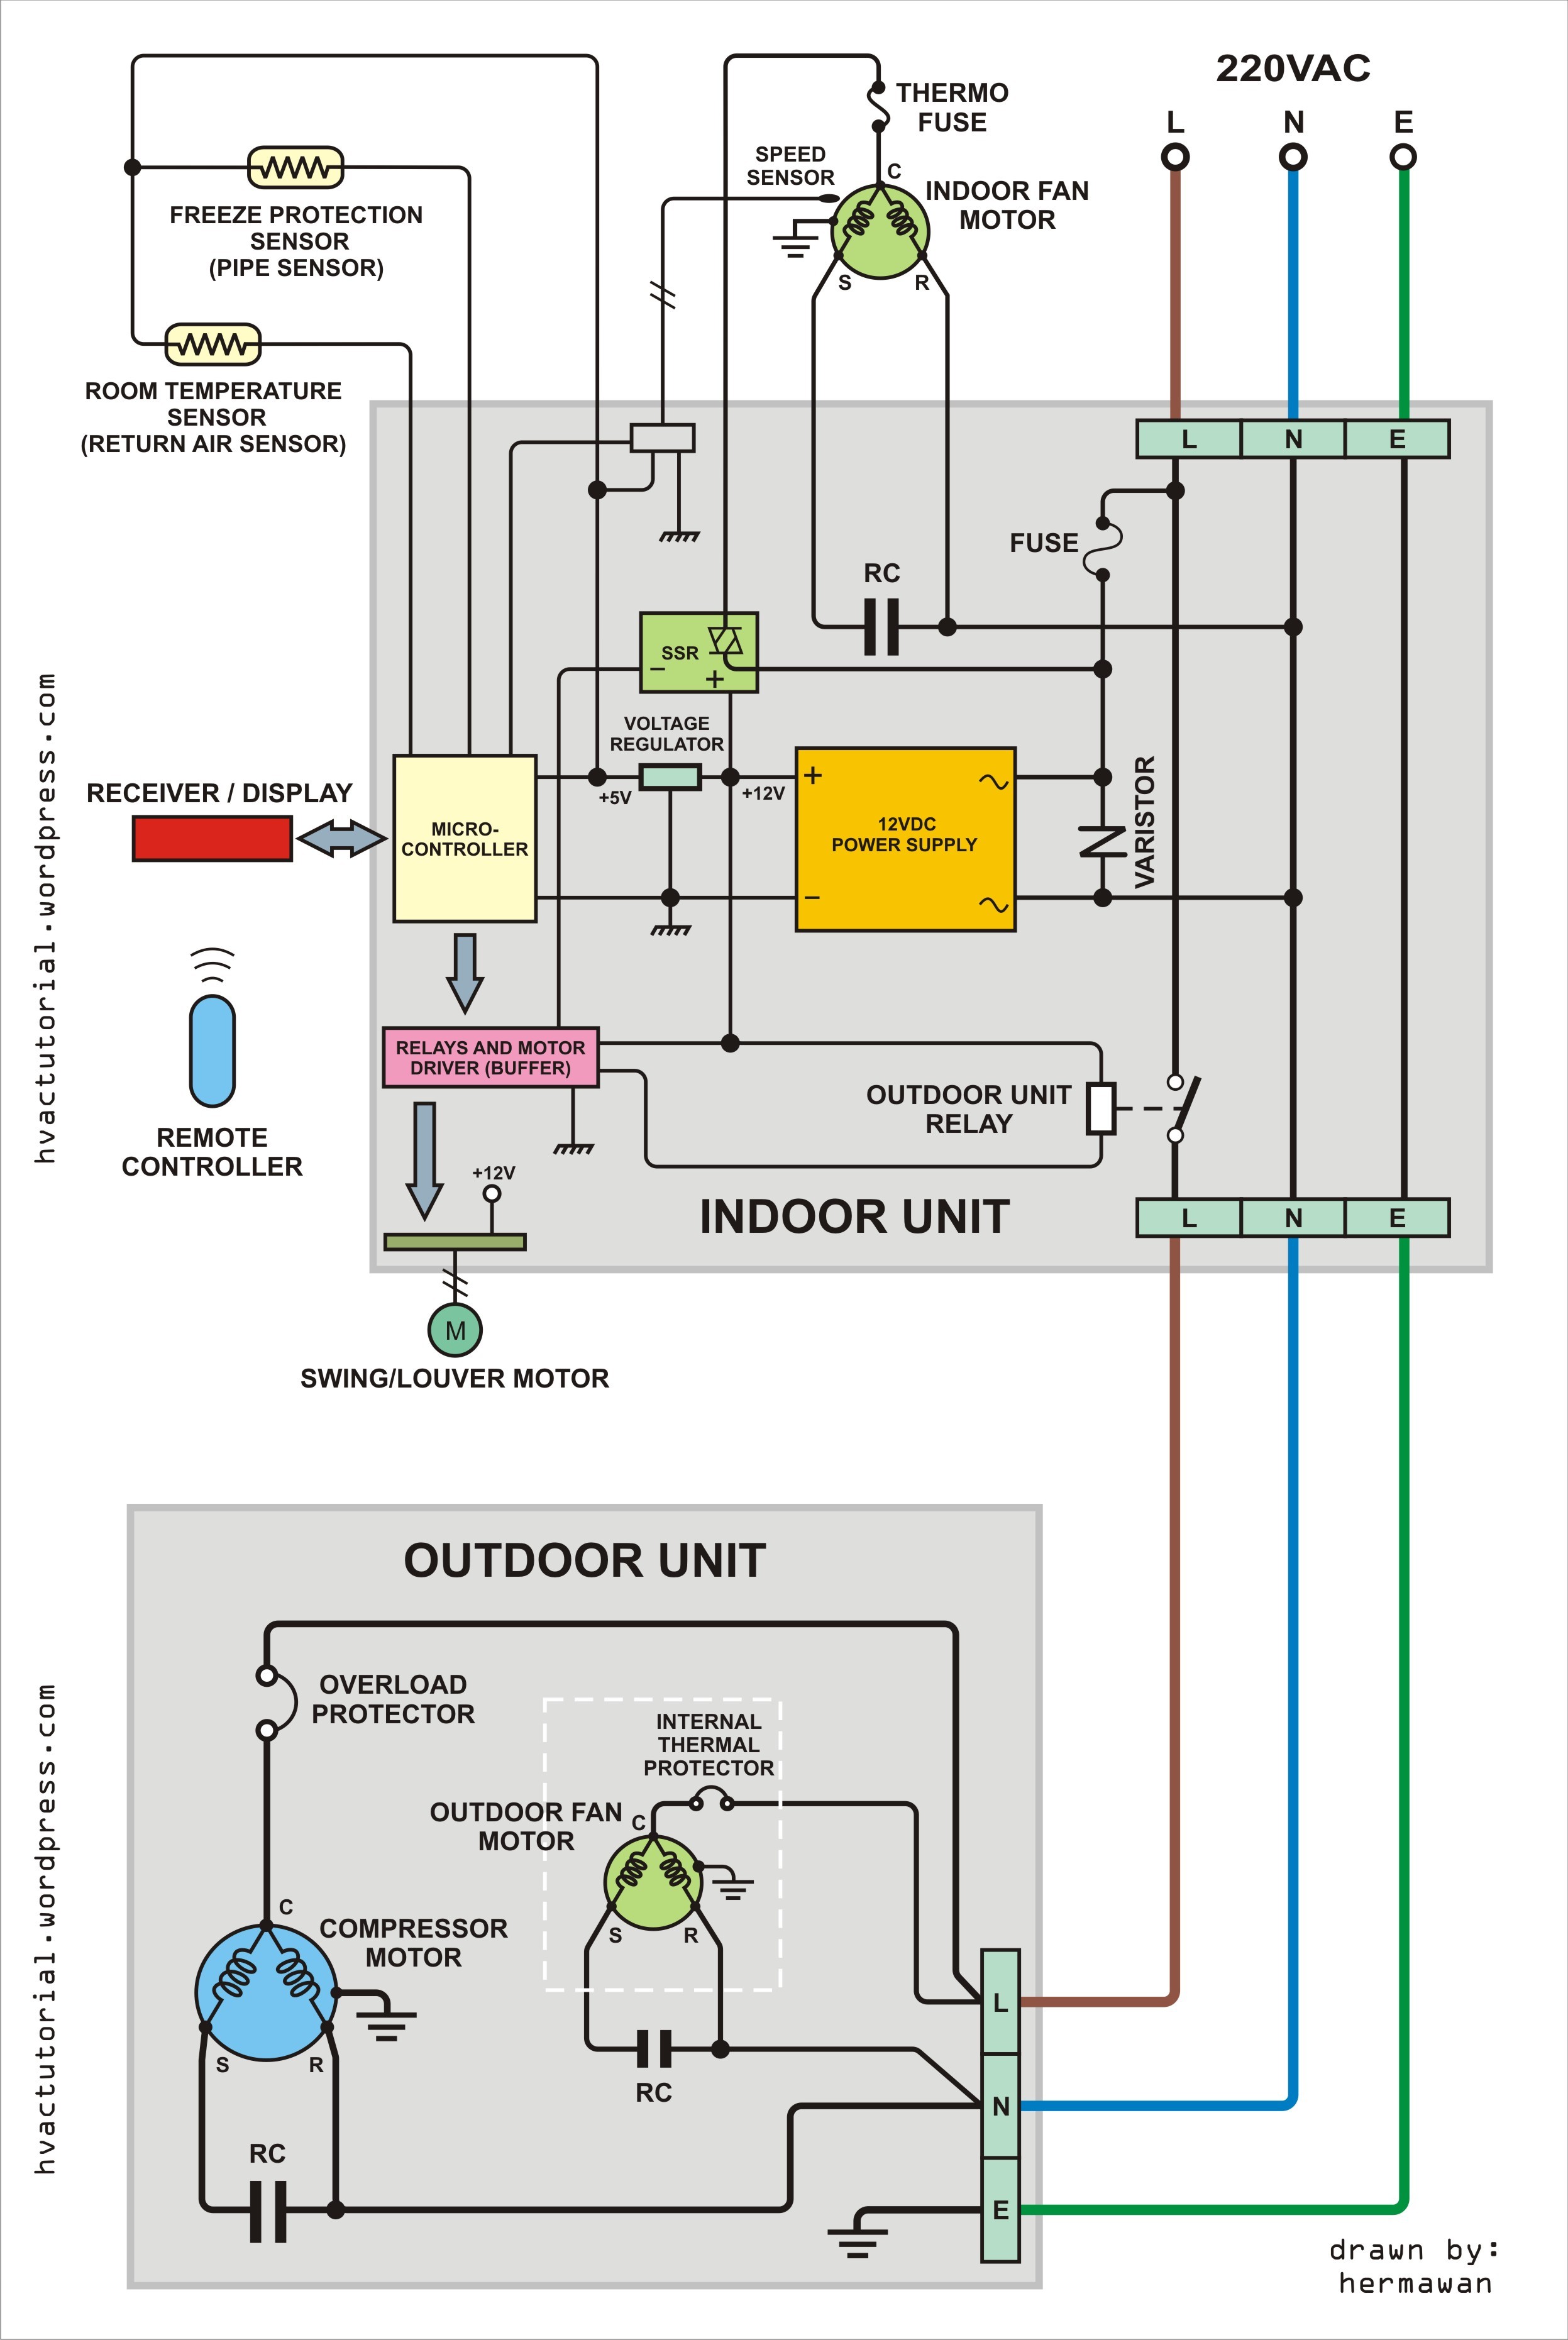 Wiring Diagram Split System Air Con Conditioner Throughout Carrier Ac